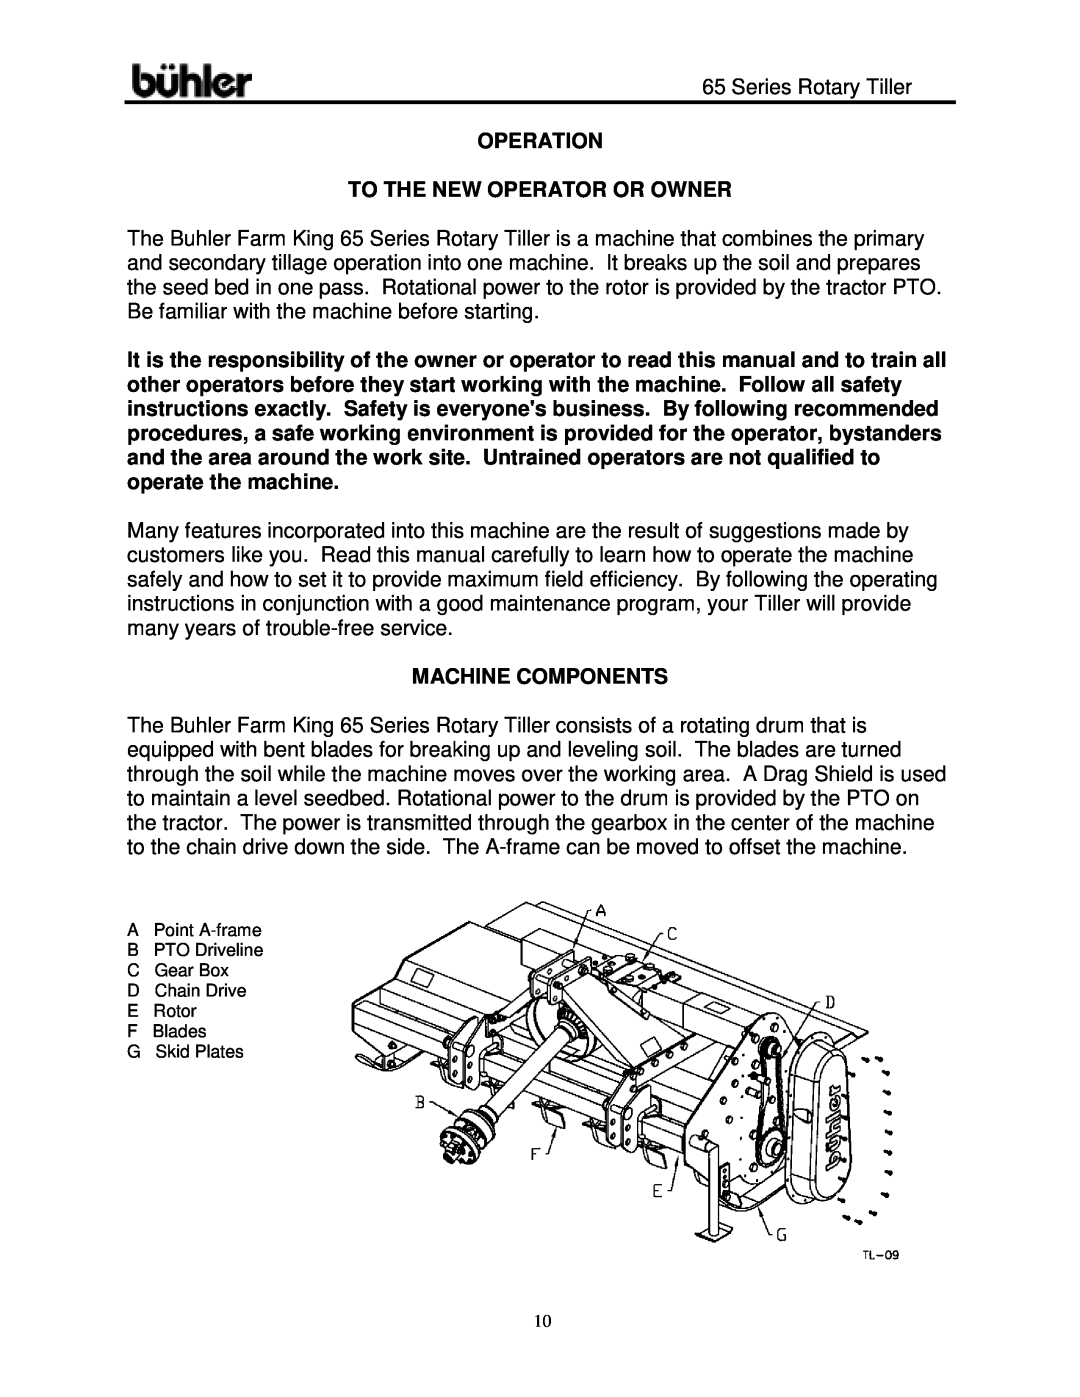 Buhler 65 Series warranty Operation To The New Operator Or Owner, Machine Components 